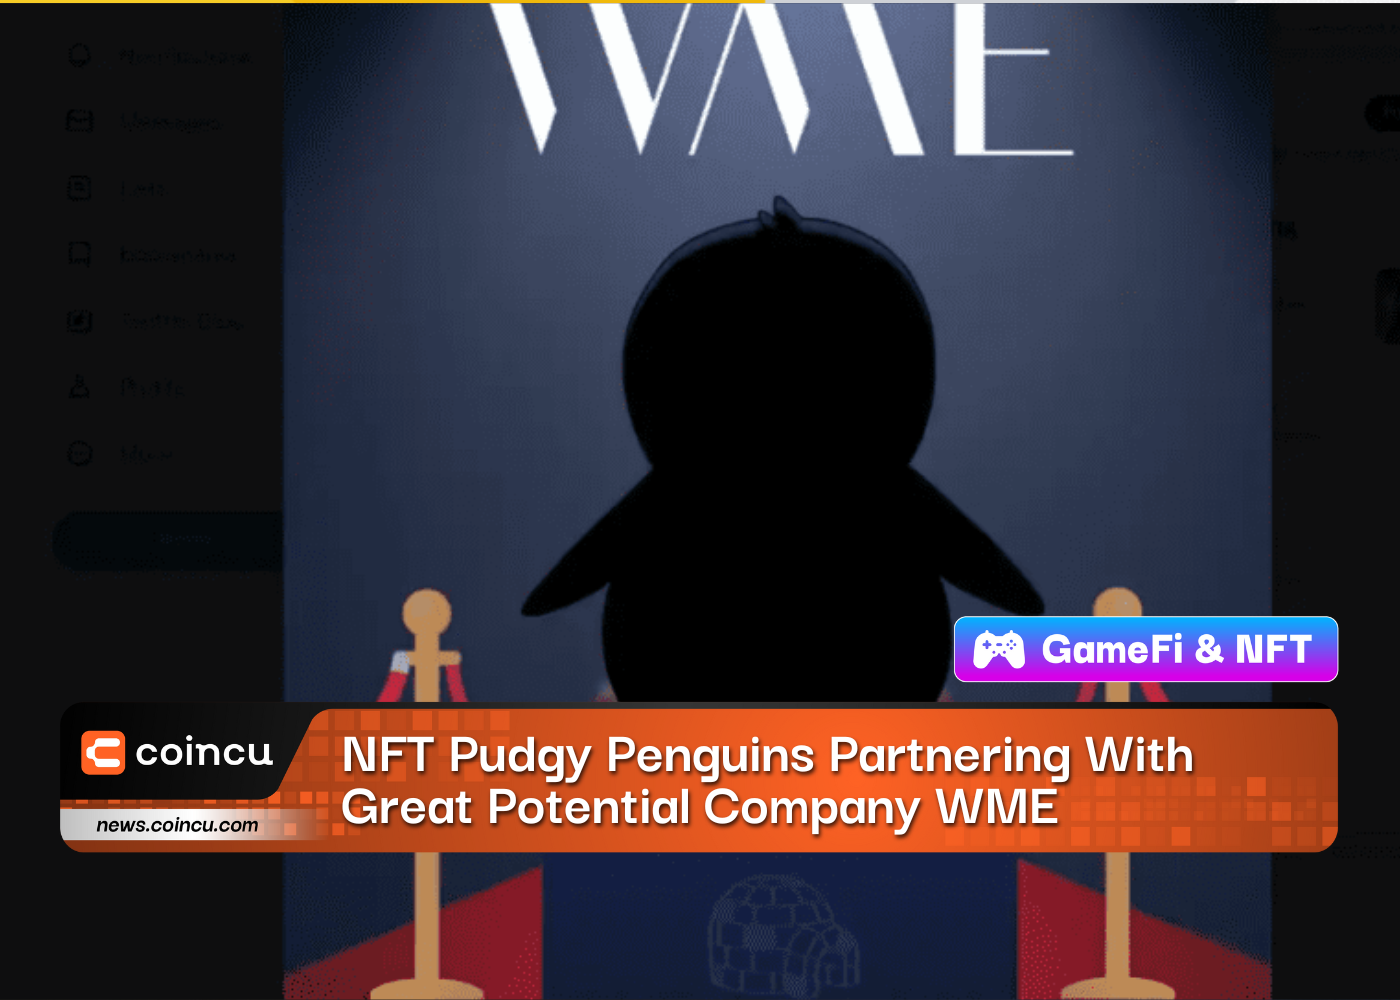 NFT Pudgy Penguins Partnering With Great Potential Company WME